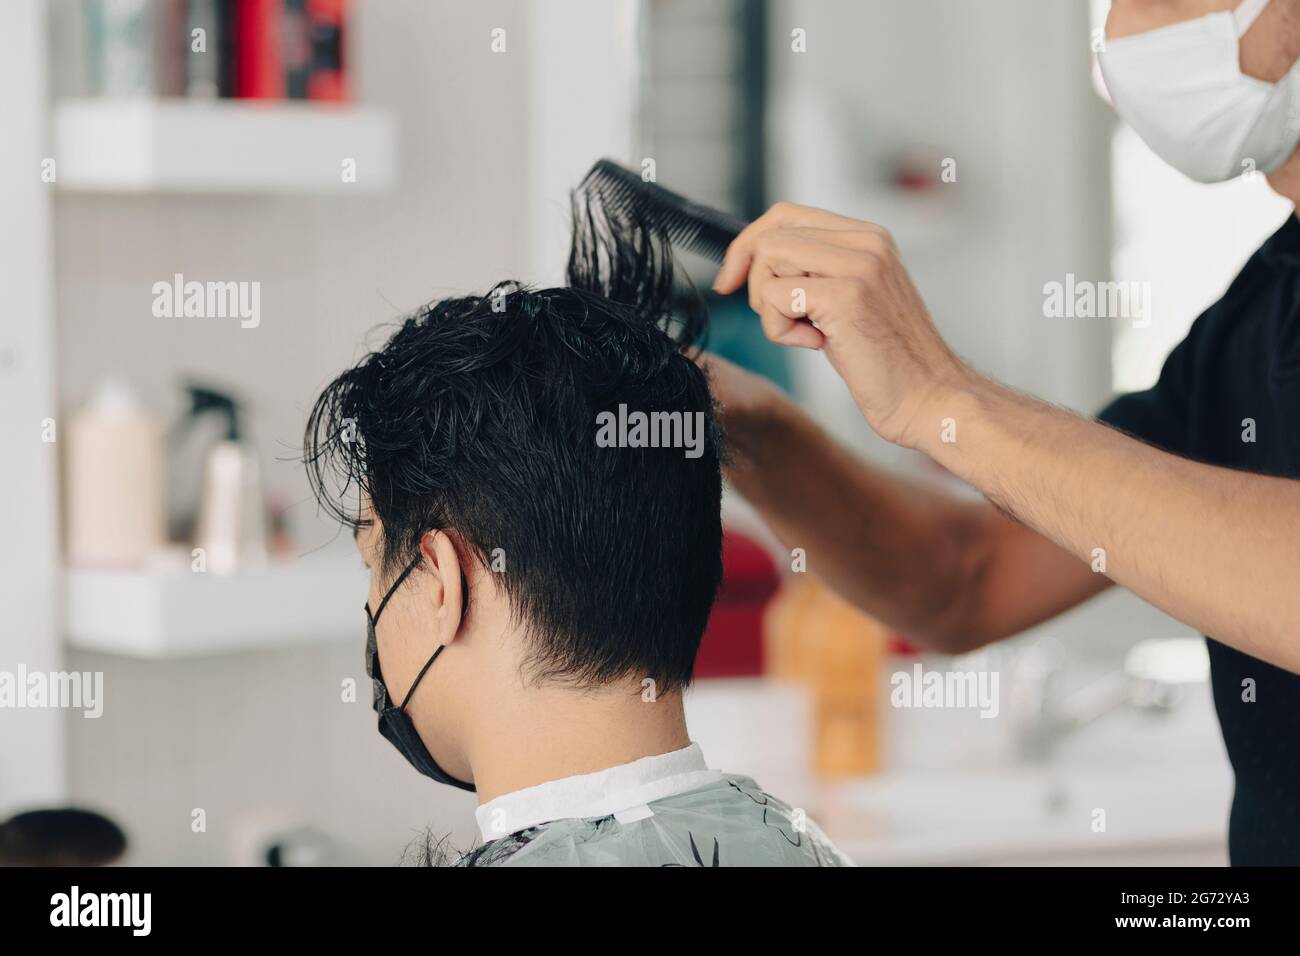 Haircut at a men's barbershop.Haircut with scissors Stock Photo